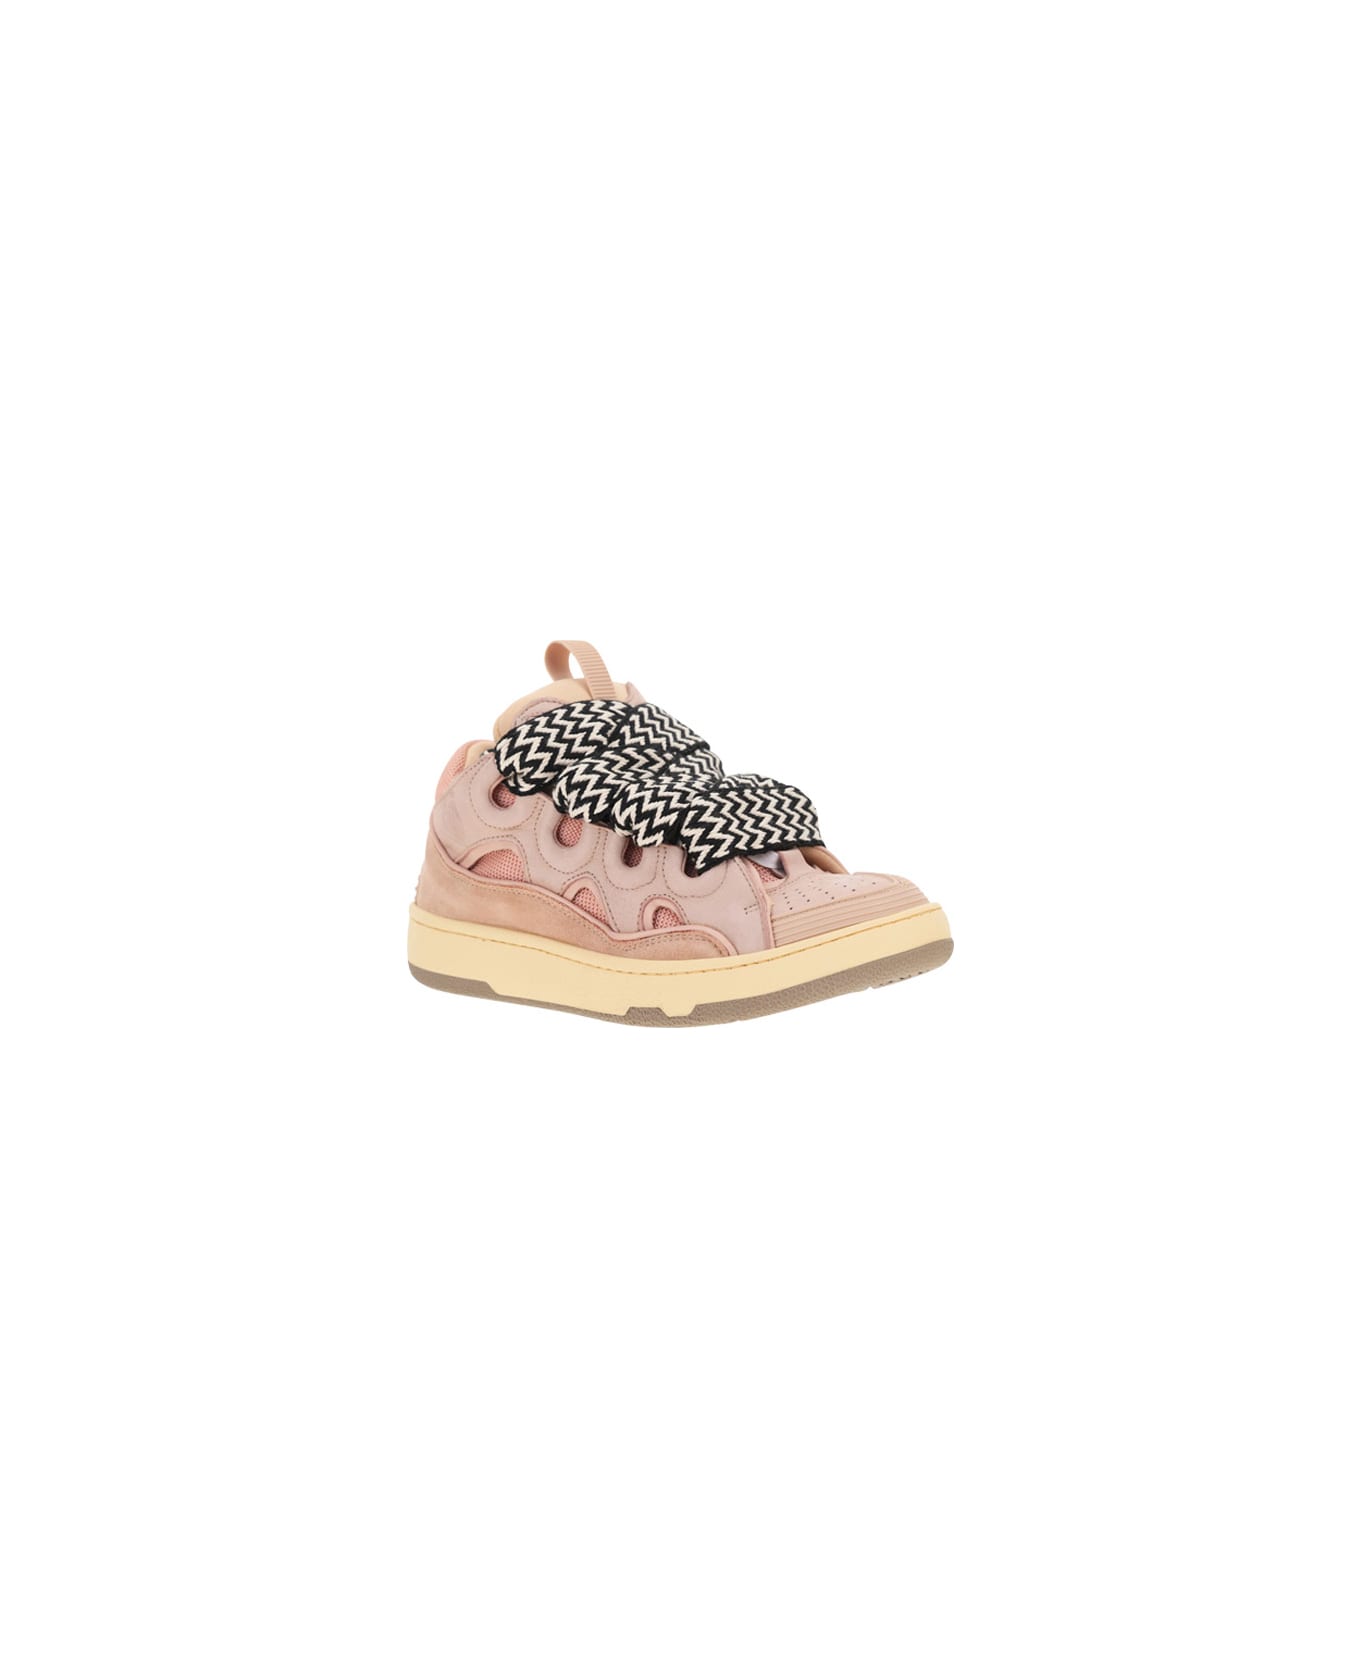 Lanvin Curb Sneakers In Pink Leather - Pale Pink